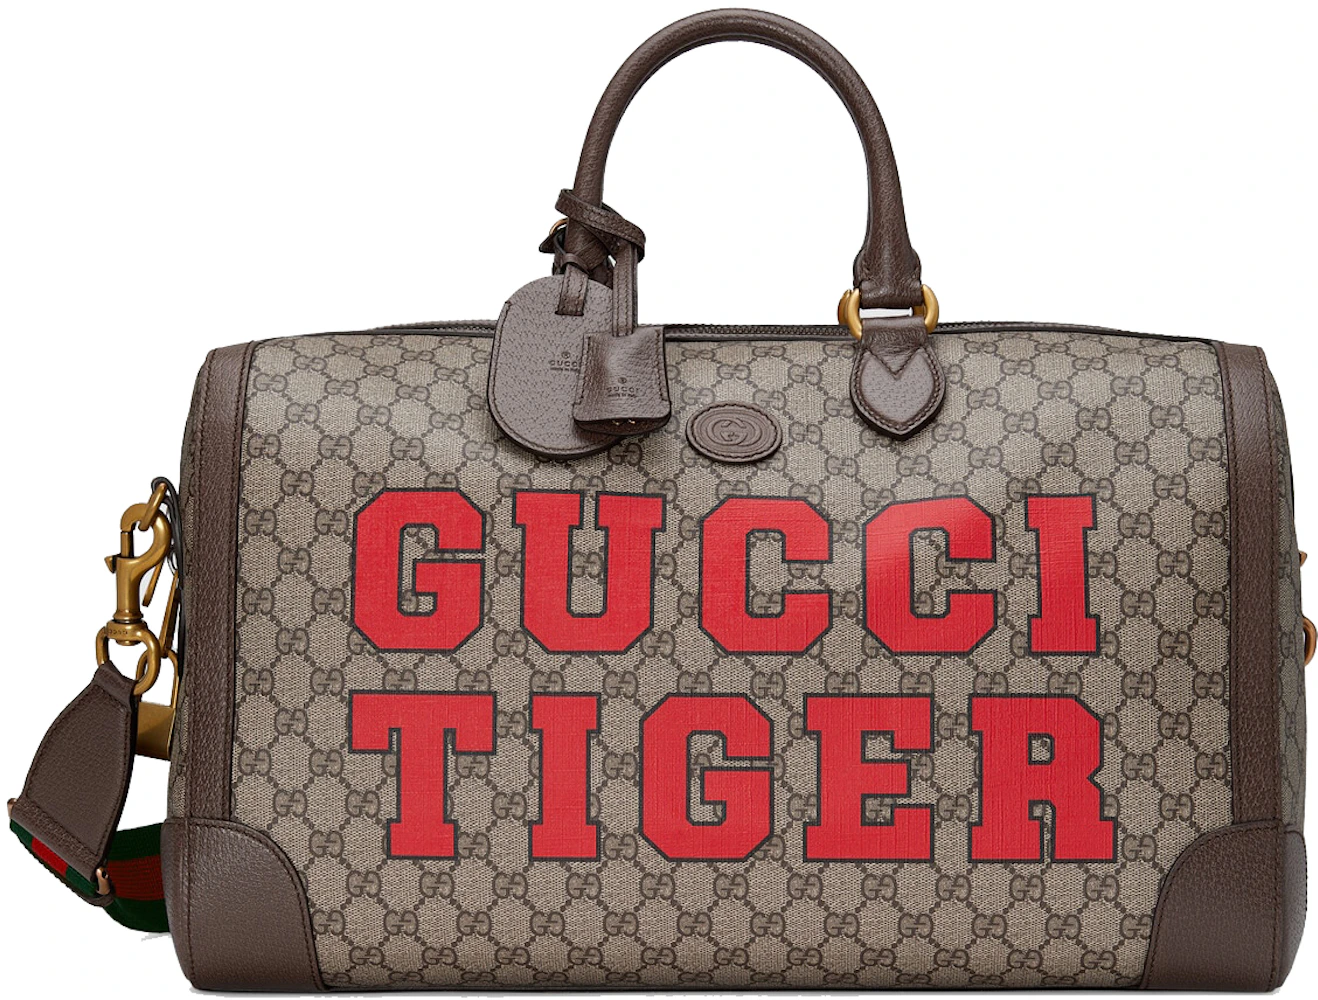 Gucci Tiger GG Small Duffle Bag Beige/Ebony in Canvas/Leather with - US